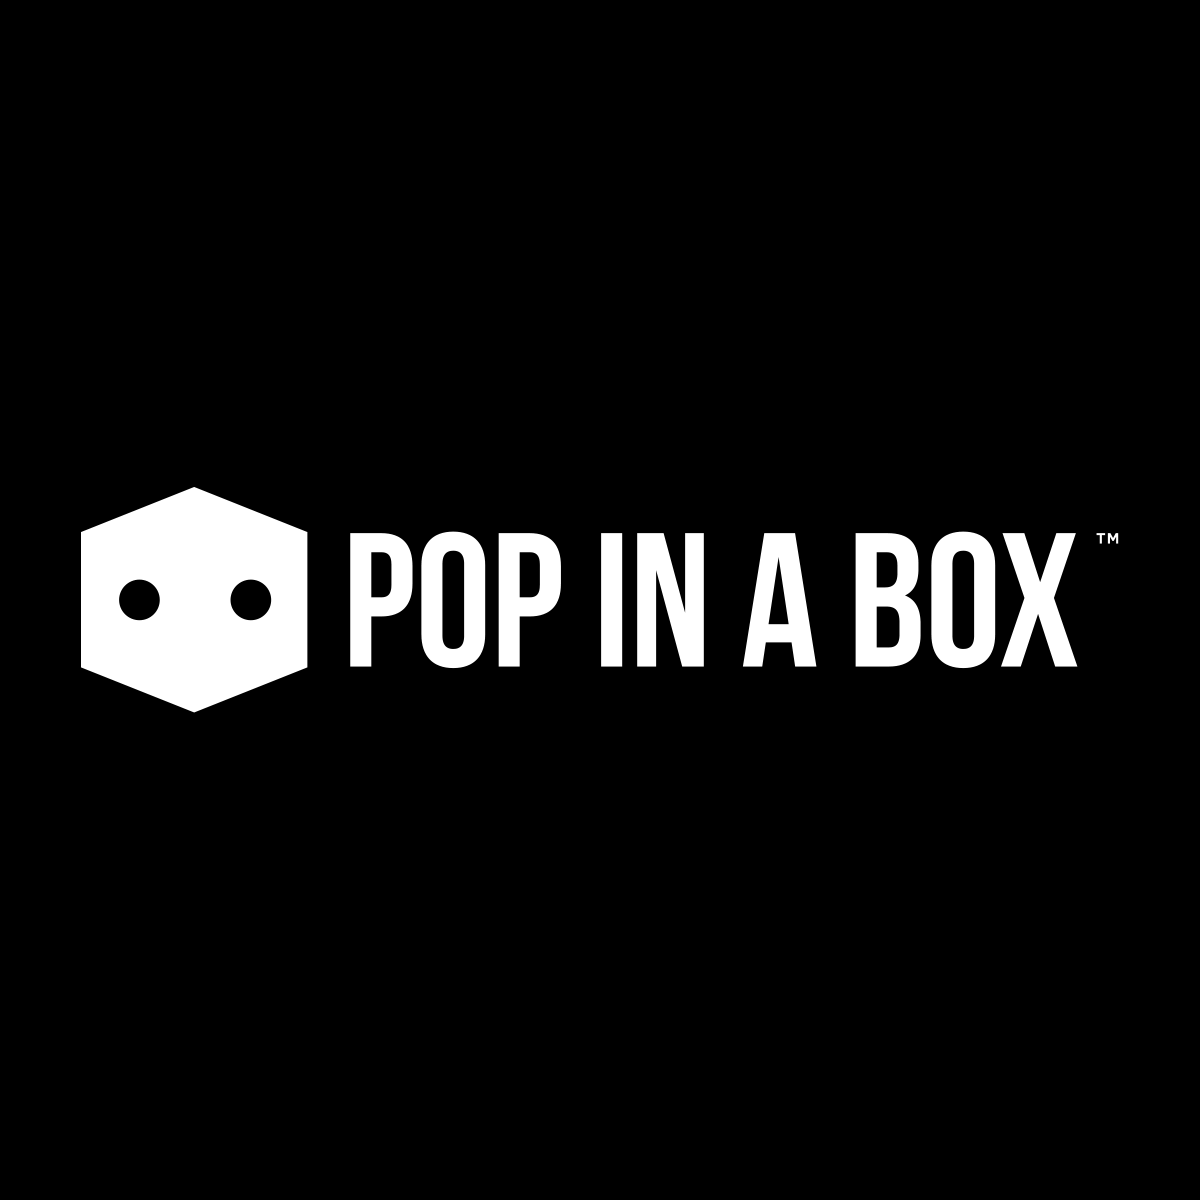 10% Off With Pop In A Box UK Promo